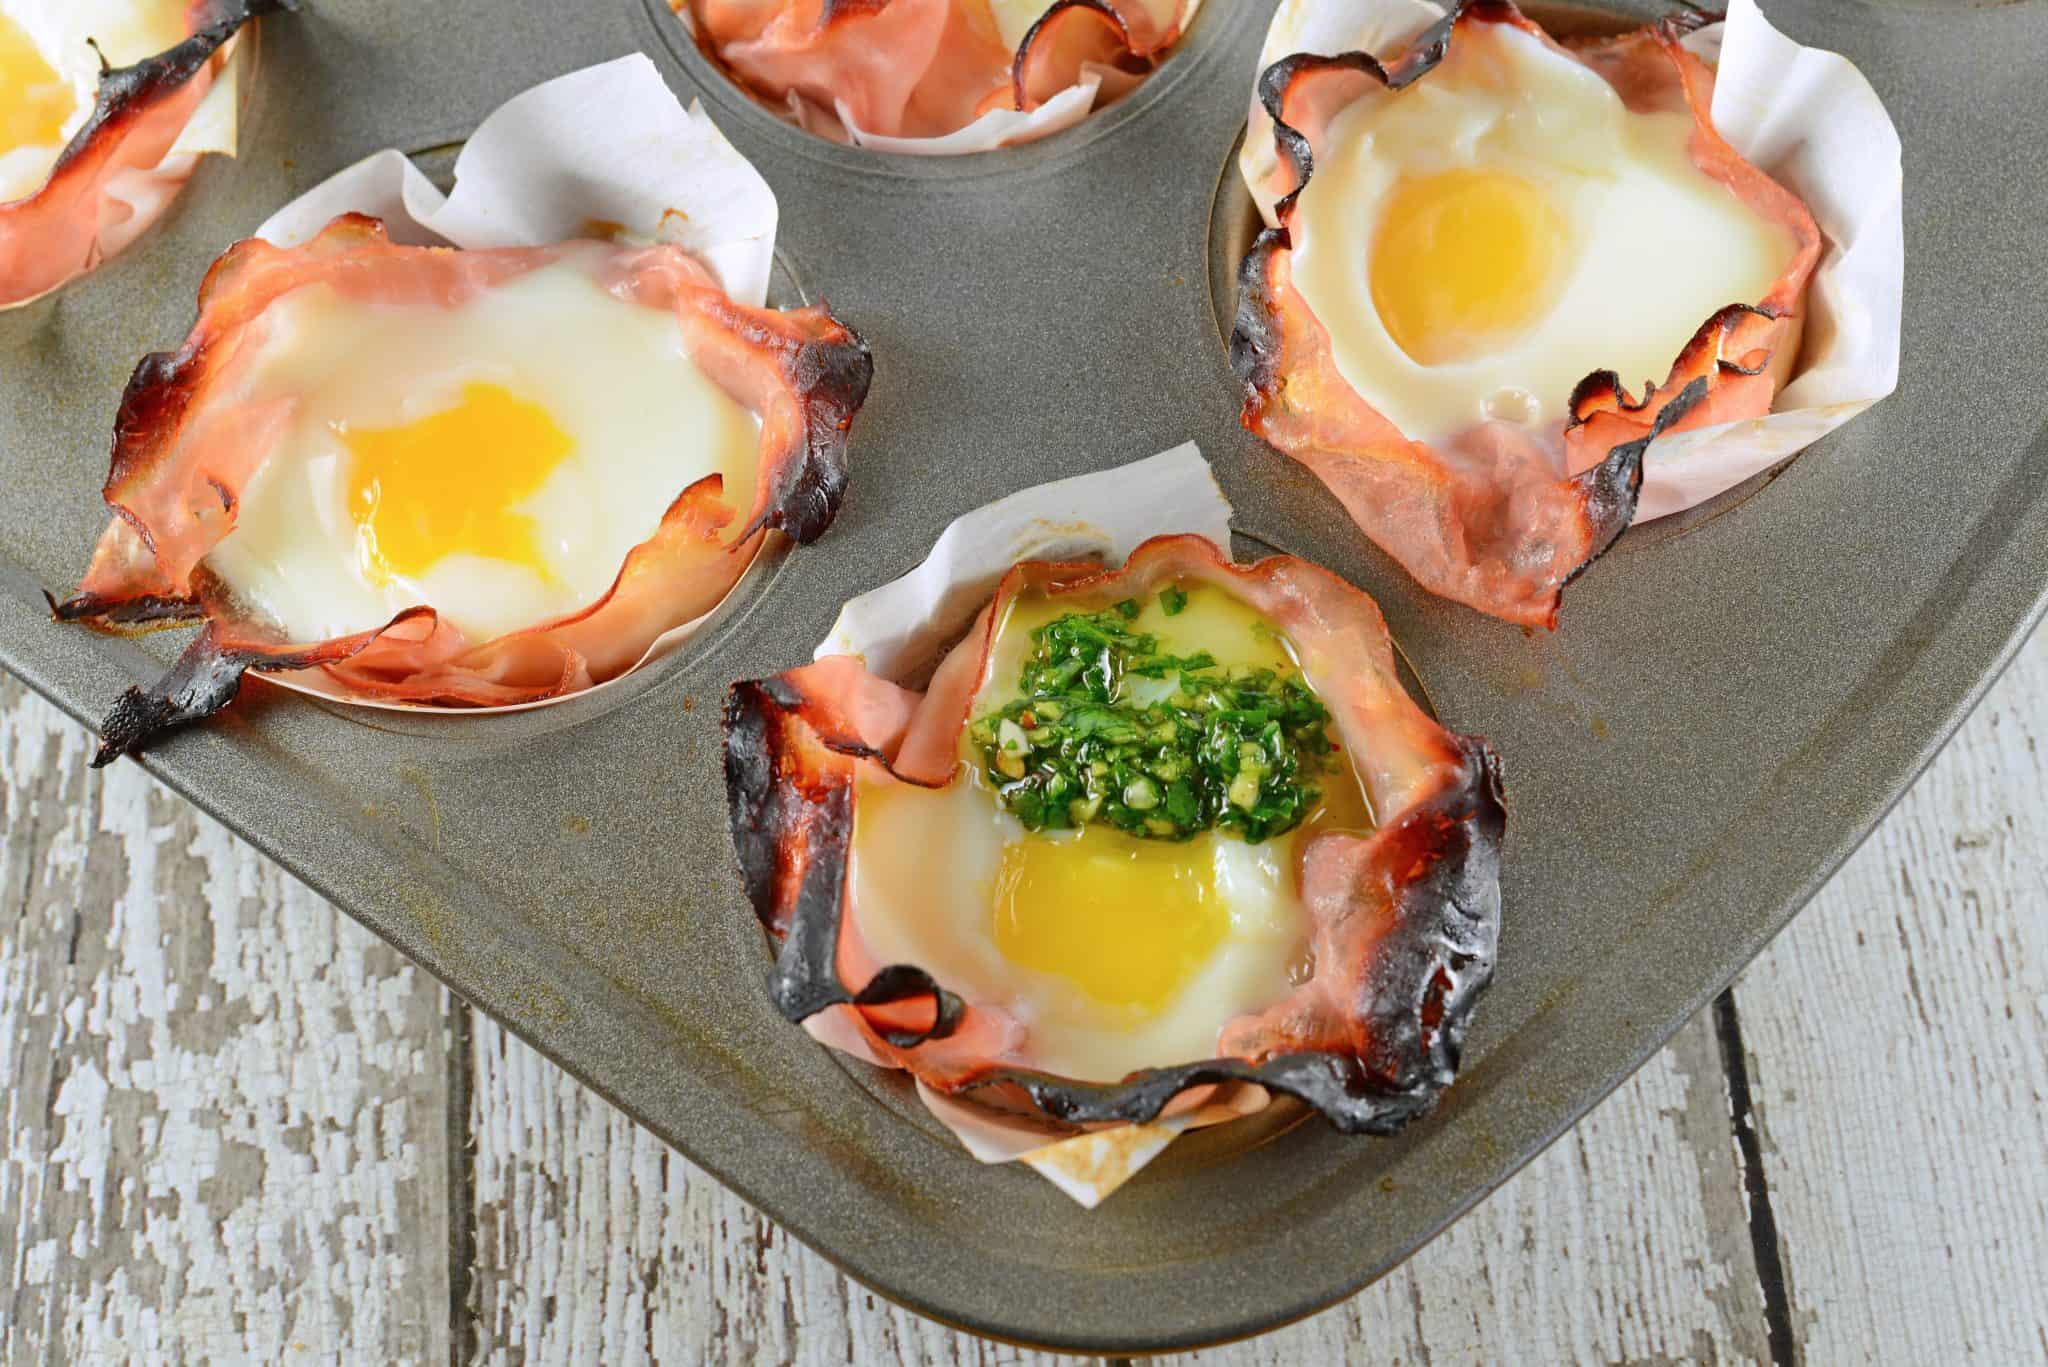 Chimichurri Egg Muffins are eggs baked in ham with a zesty chimichurri sauce made with fresh herbs and garlic. The perfect make ahead breakfast idea! #greeneggsandham #eggmuffins www.savoryexperiments.com 